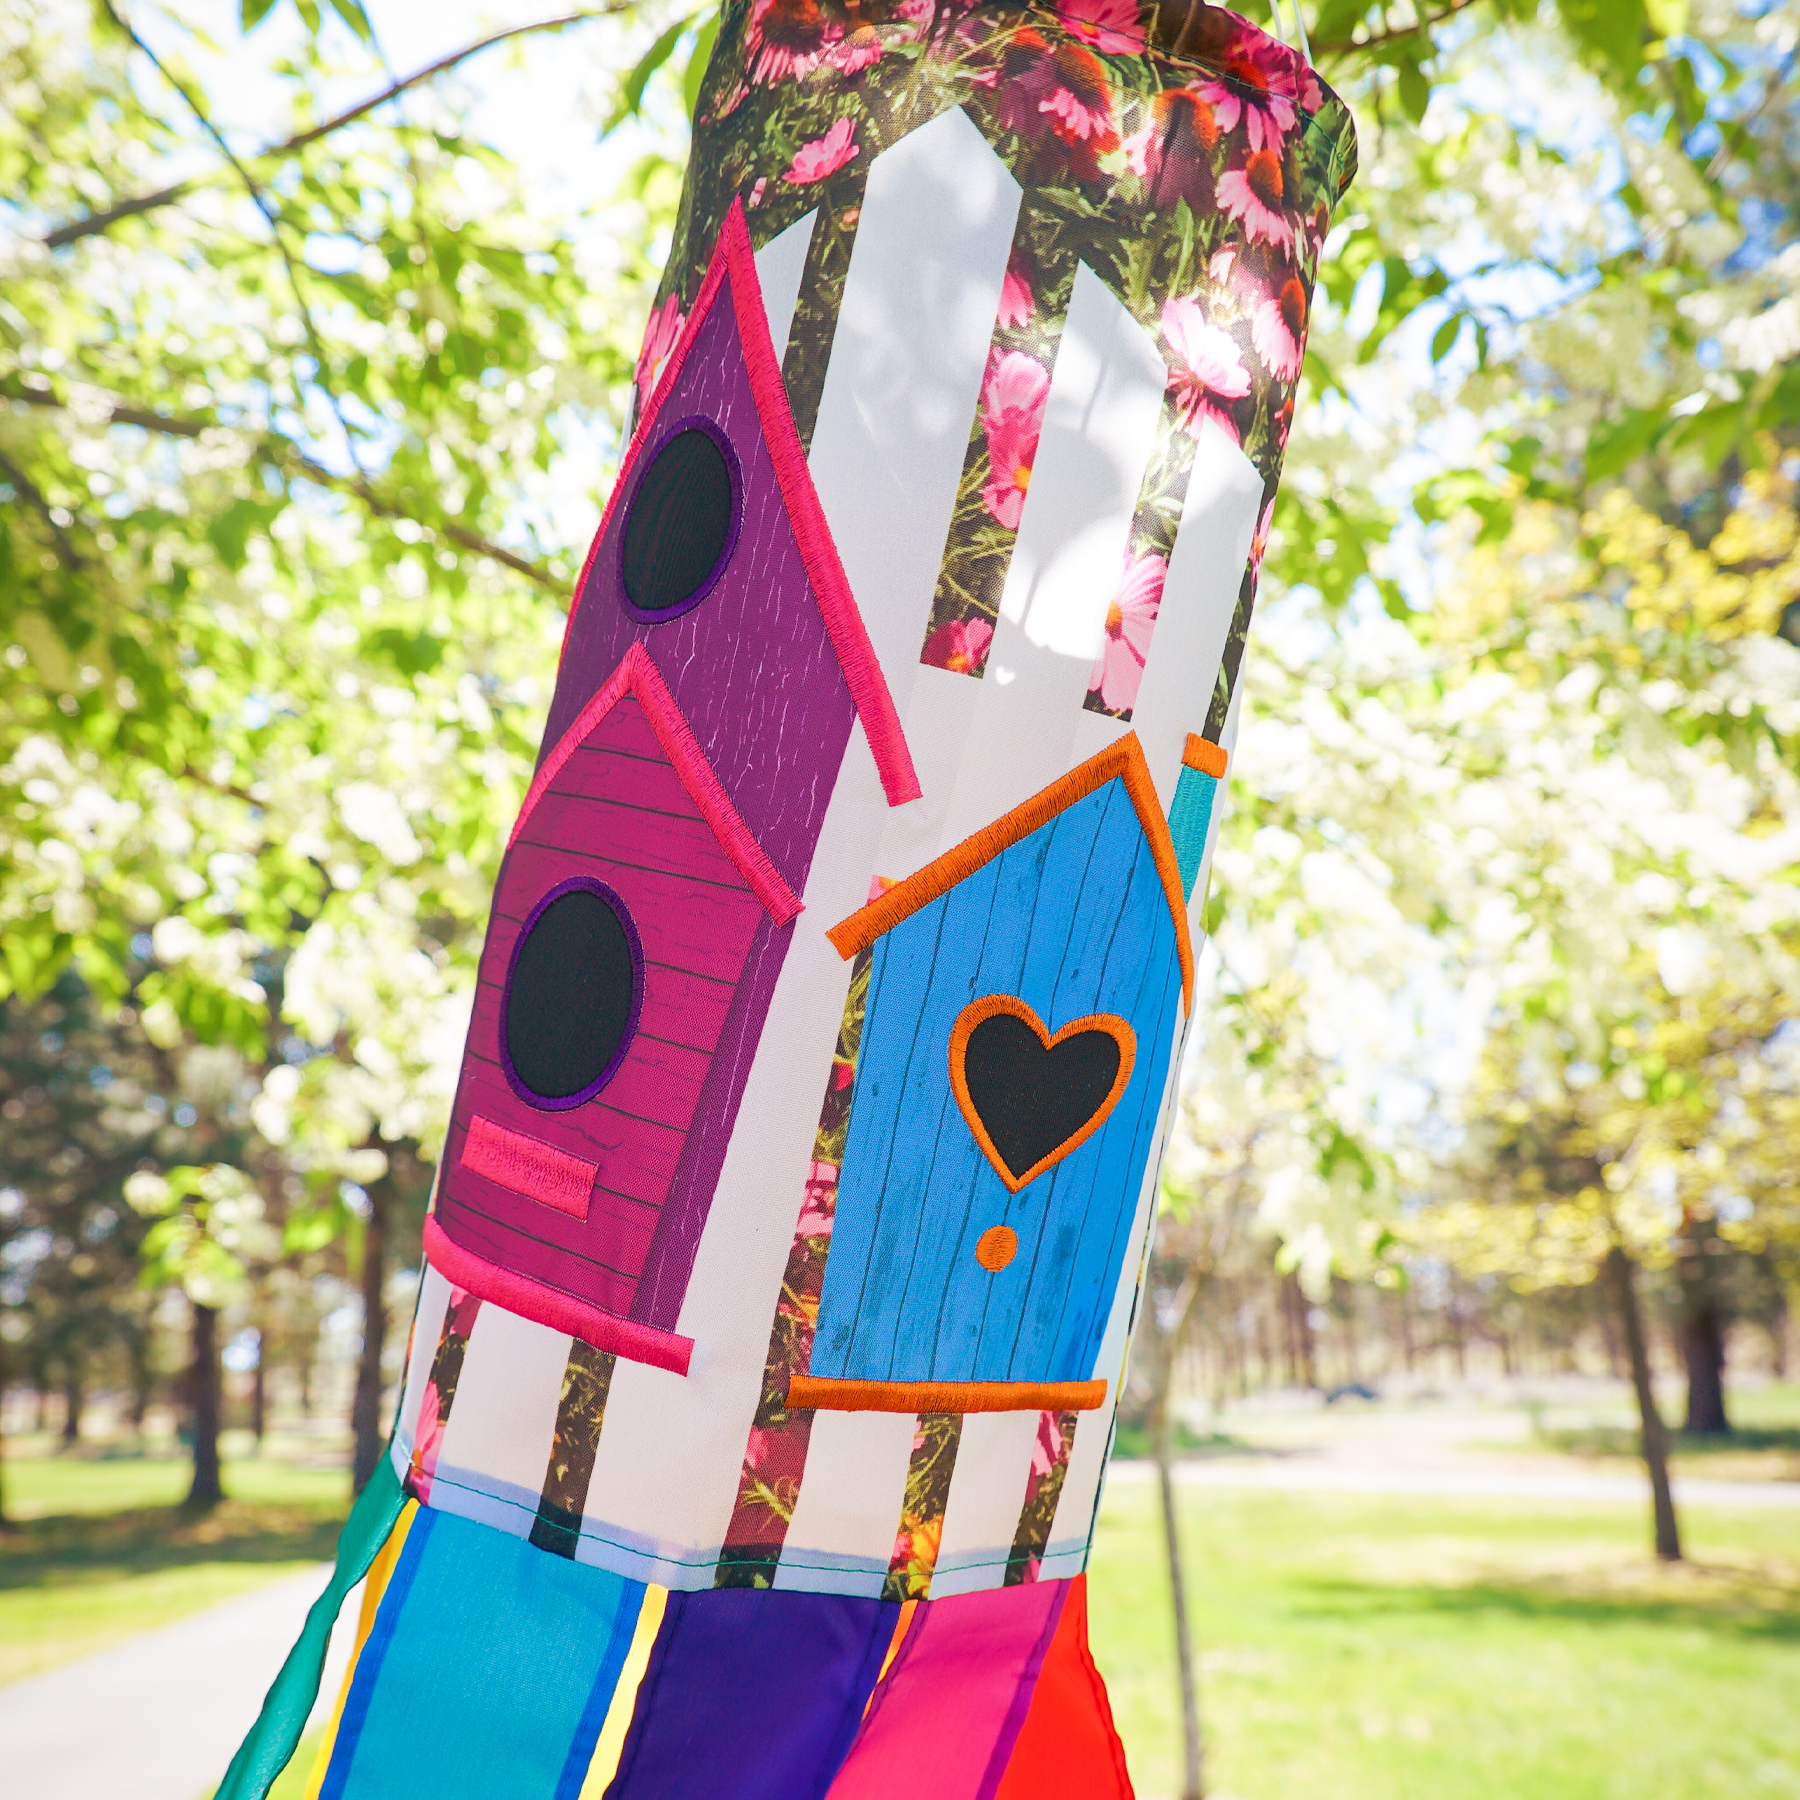 In The Breeze 5072 — Birdhouse Garden 40" Windsock, Colorful Outdoor and Garden Decoration - image 3 of 7